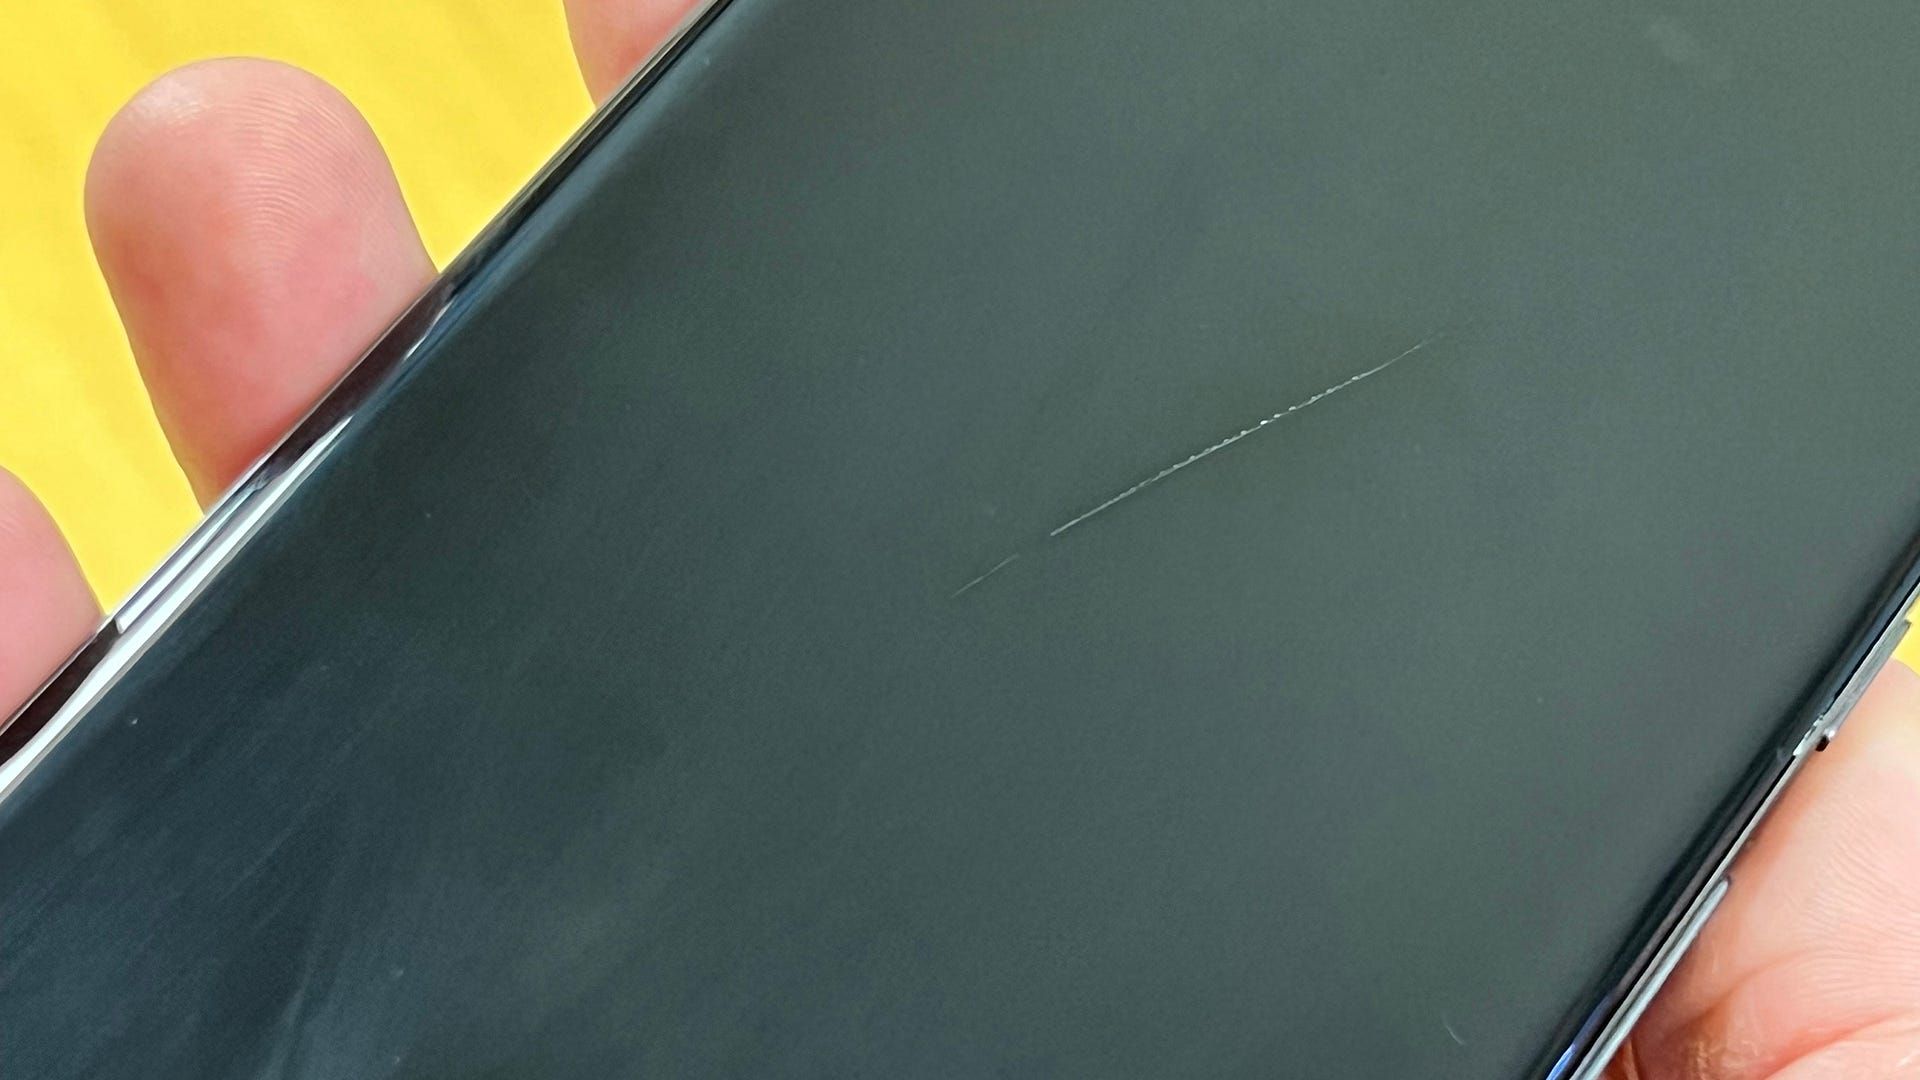 A deeply scratched phone display